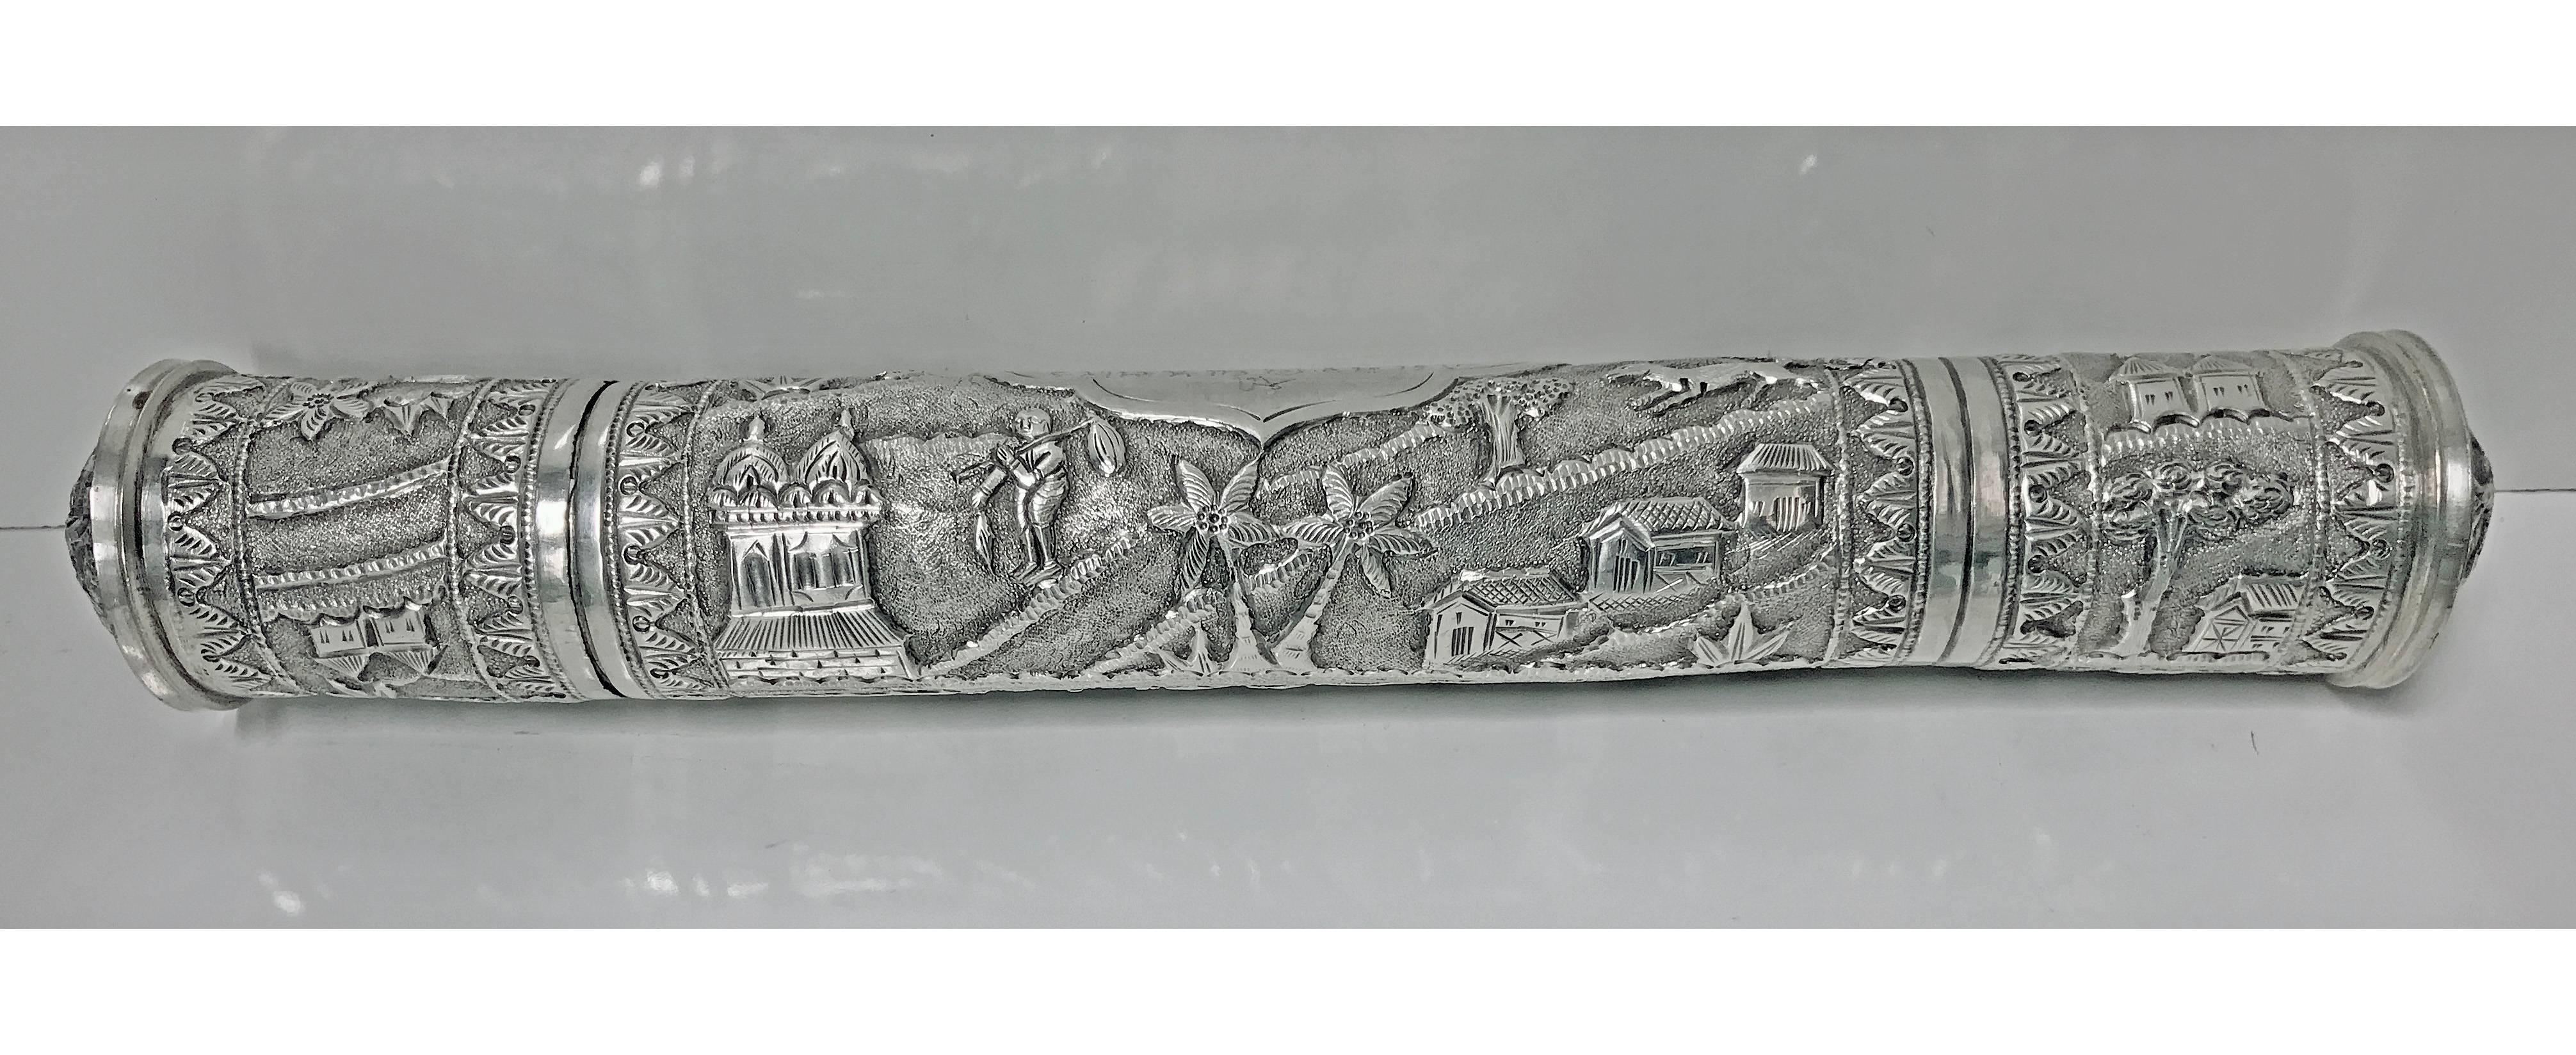 Antique silver scroll holder, circa 1900. The cylindrical container with relief scenic repoussé work decoration, slightly dome ends and pull off cover to one end, cartouche lightly pin prick engraving of possibly Arabic script verse. Length: 10.25